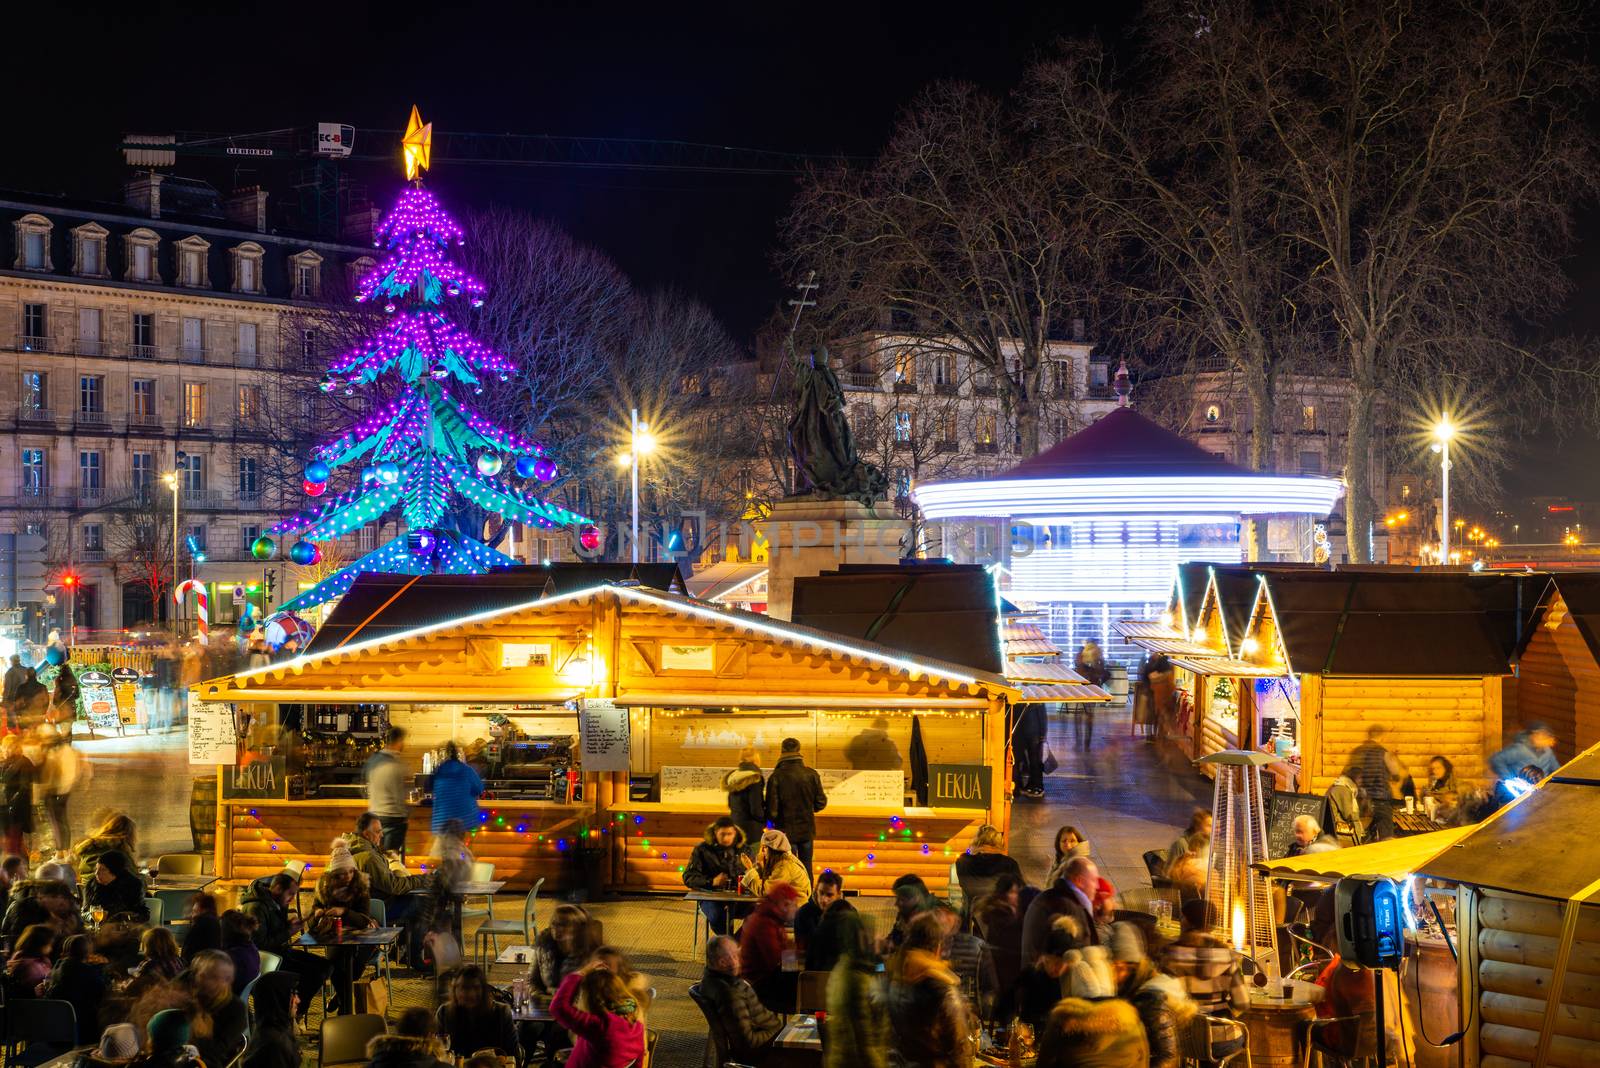 BAYONNE, FRANCE - DECEMBER 28, 2019: The Christmas market at night with the carousel and a Christmas tree carousel